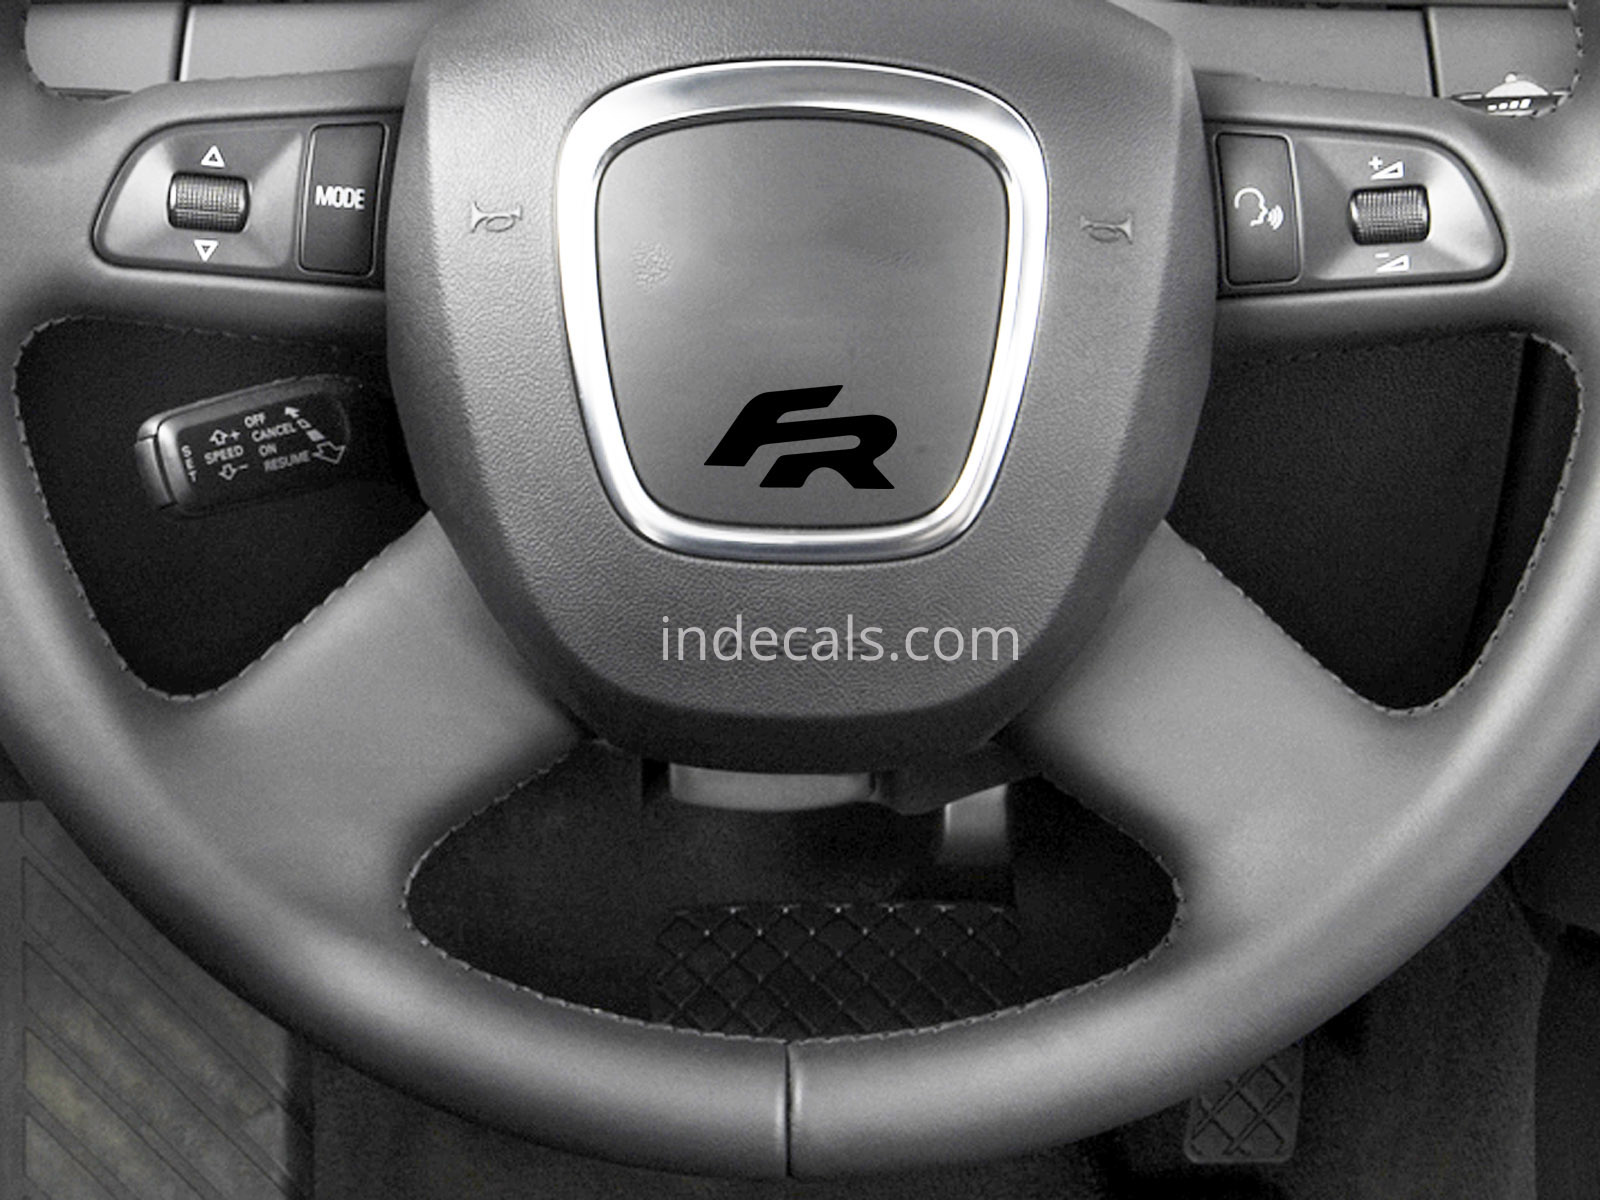 3 x Seat FR Stickers for Steering Wheel - Black